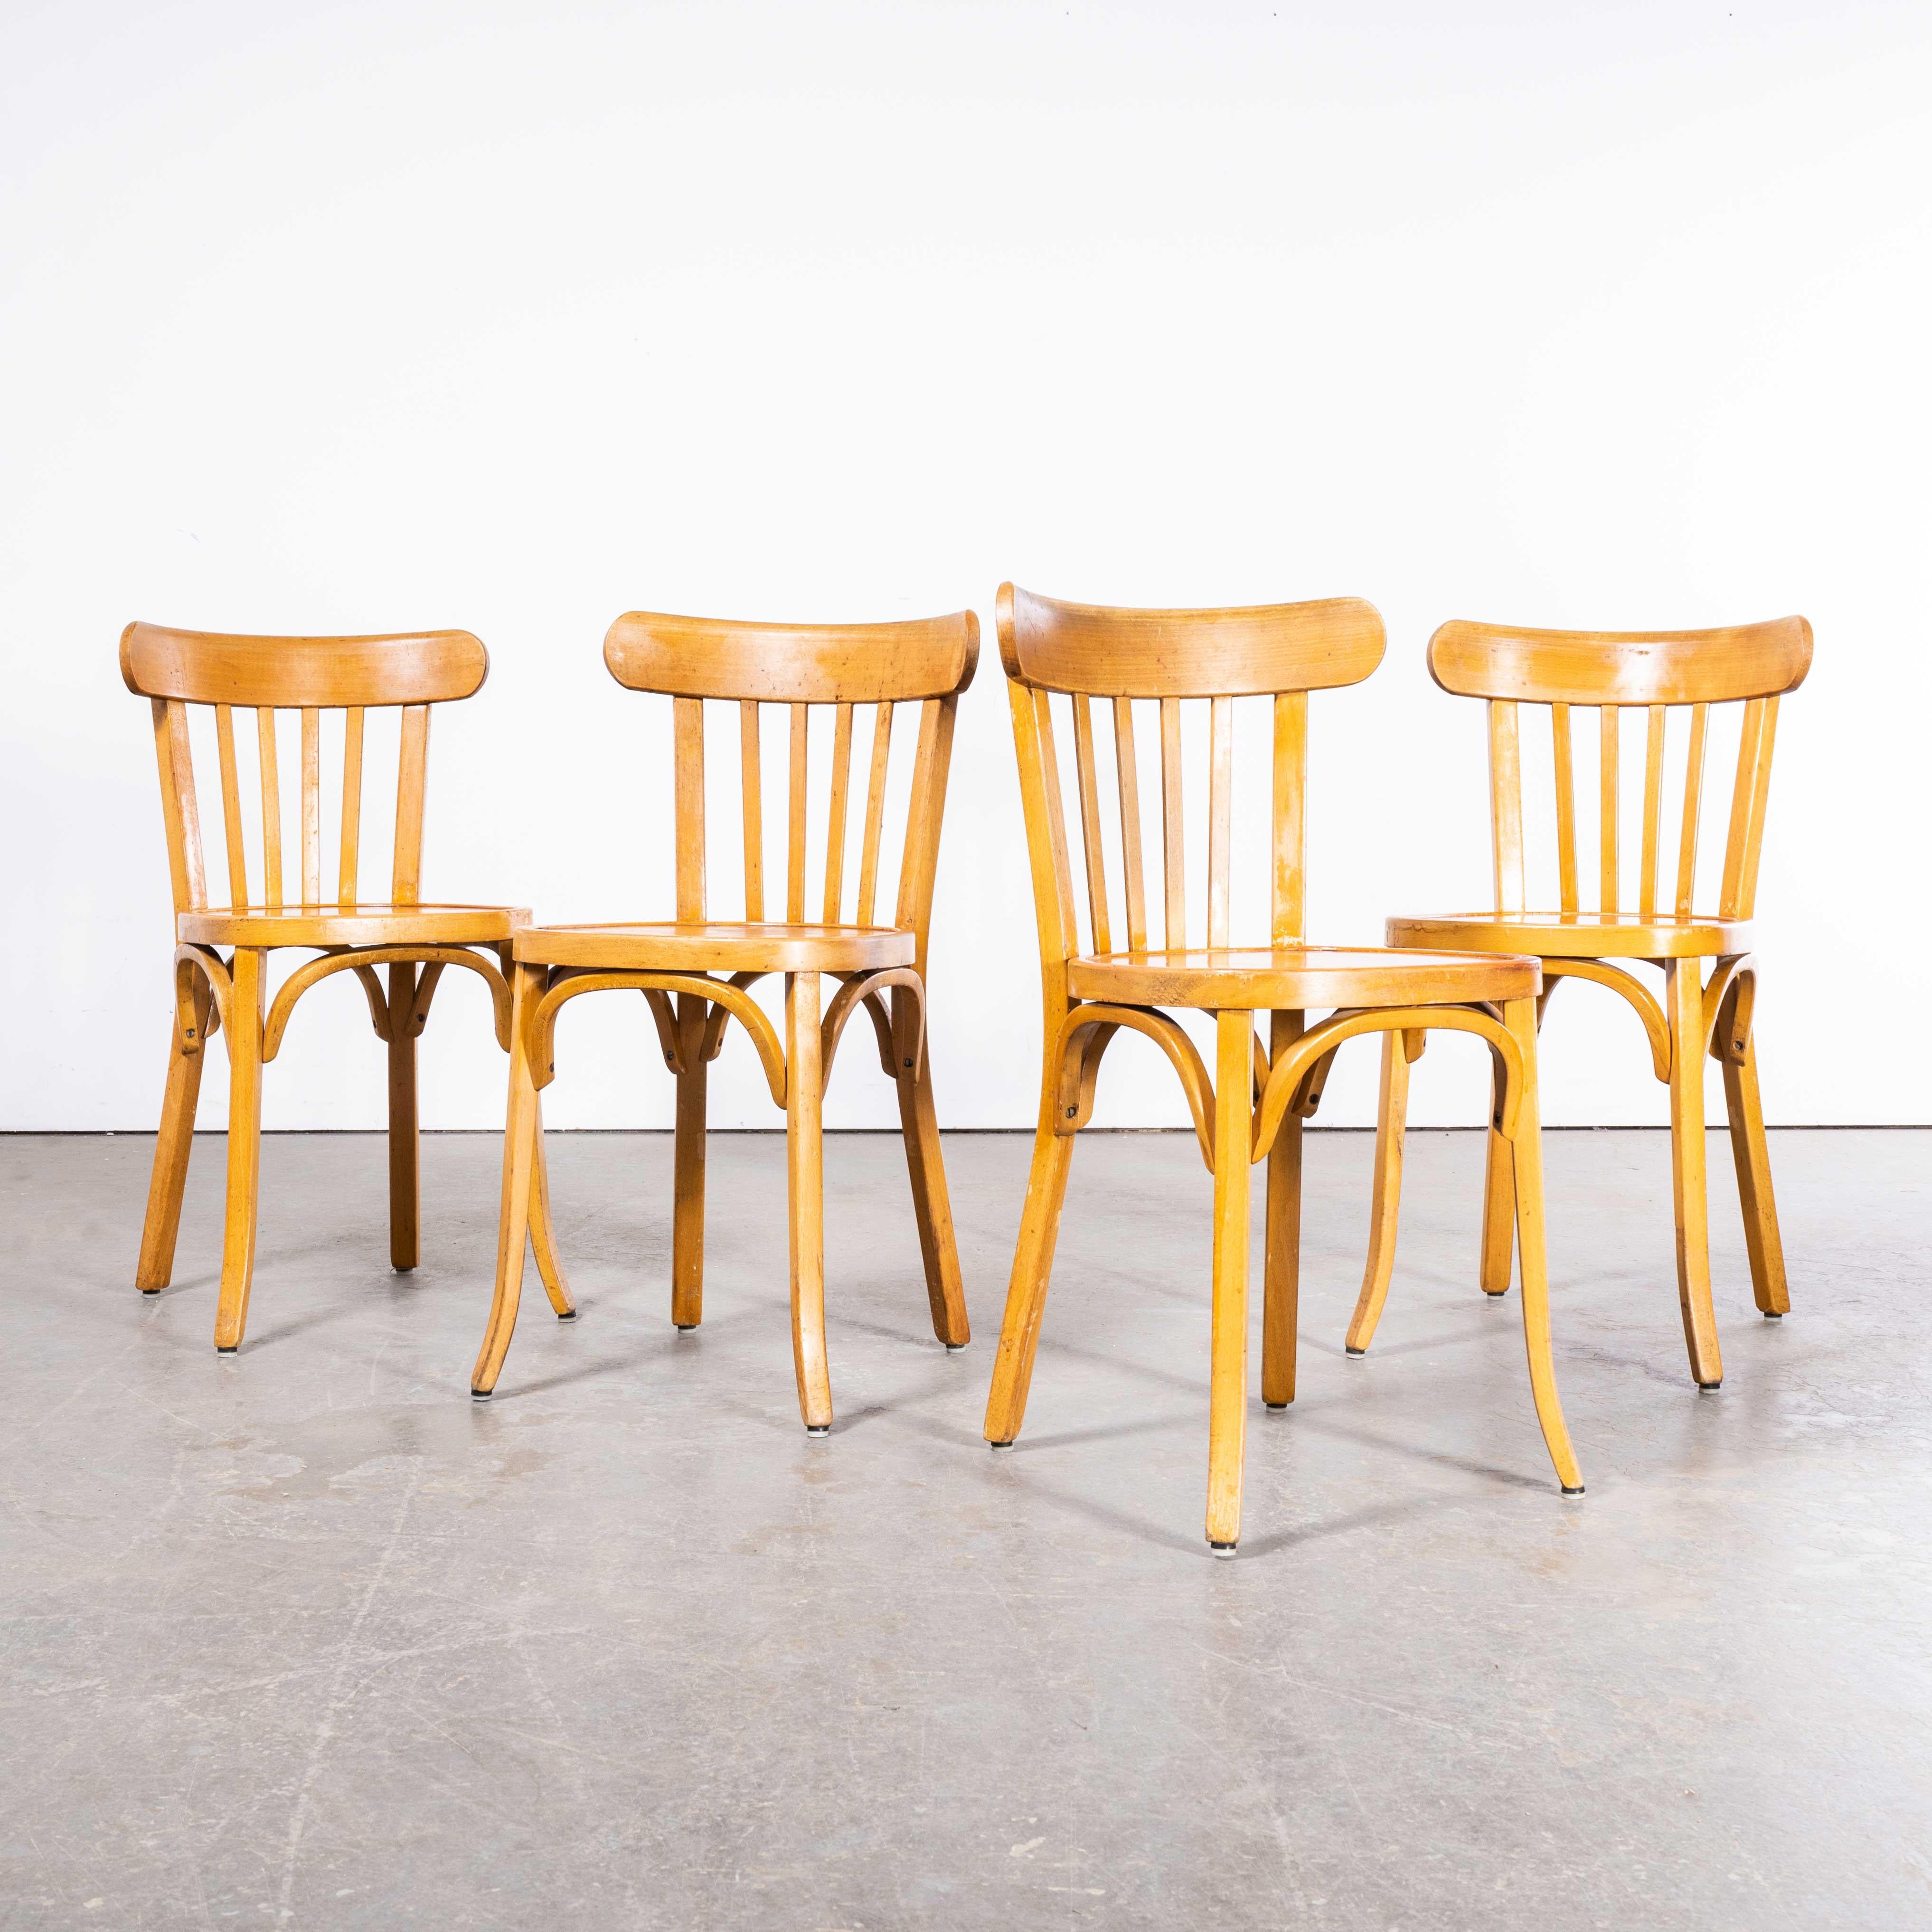 1950’s Baumann Bentwood Bistro Dining Chair – Honey – Set O Four
1950’s Baumann Bentwood Bistro Dining Chair – Honey – Set Of Four. Classic Beech bistro chair made in France by the maker Baumann. Baumann is a slightly off the radar French producer